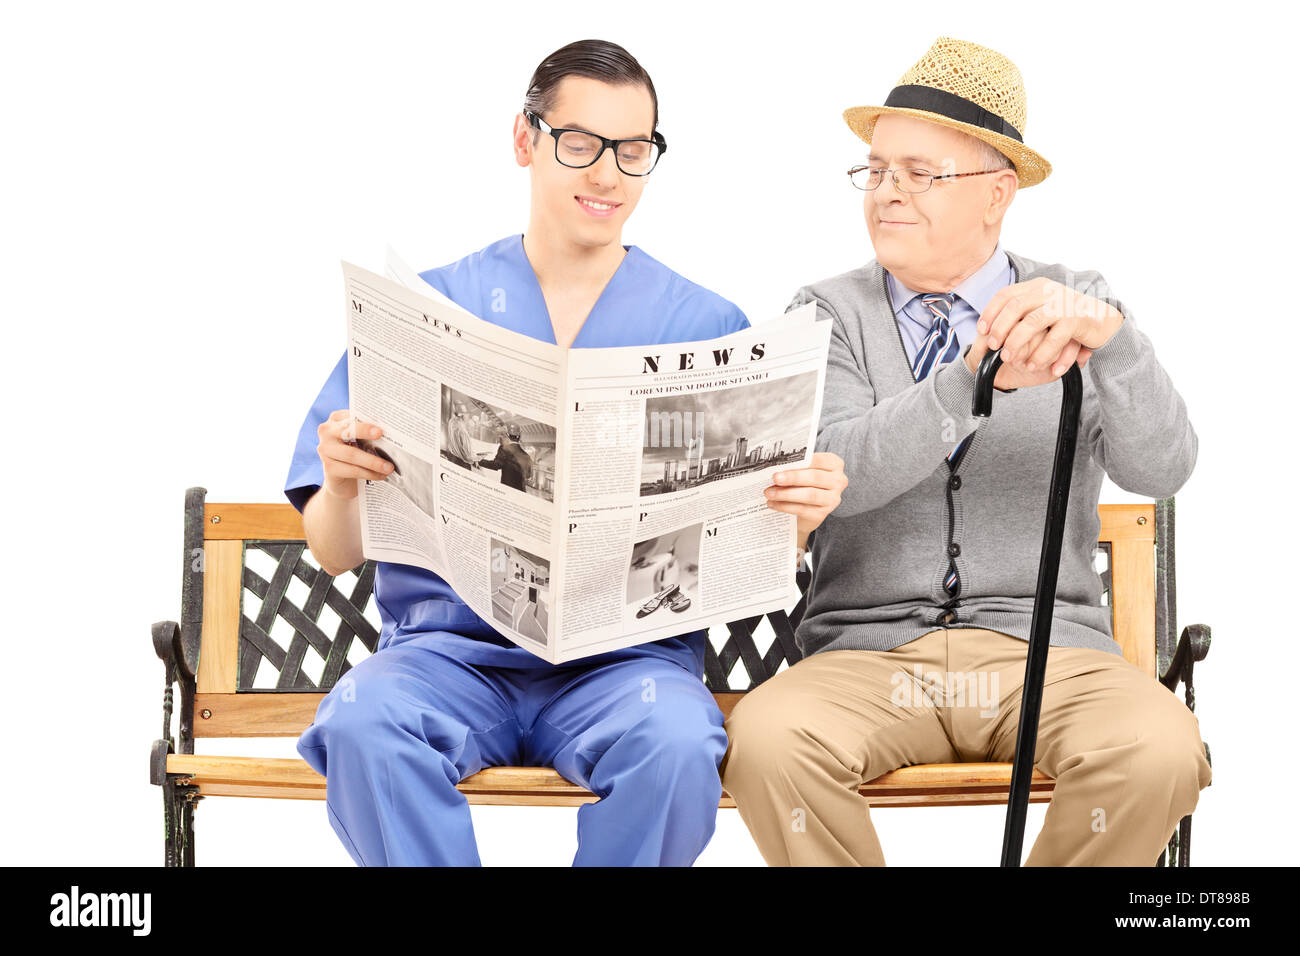 Male nurse reading a newspaper to an elderly gentleman seated on bench Stock Photo